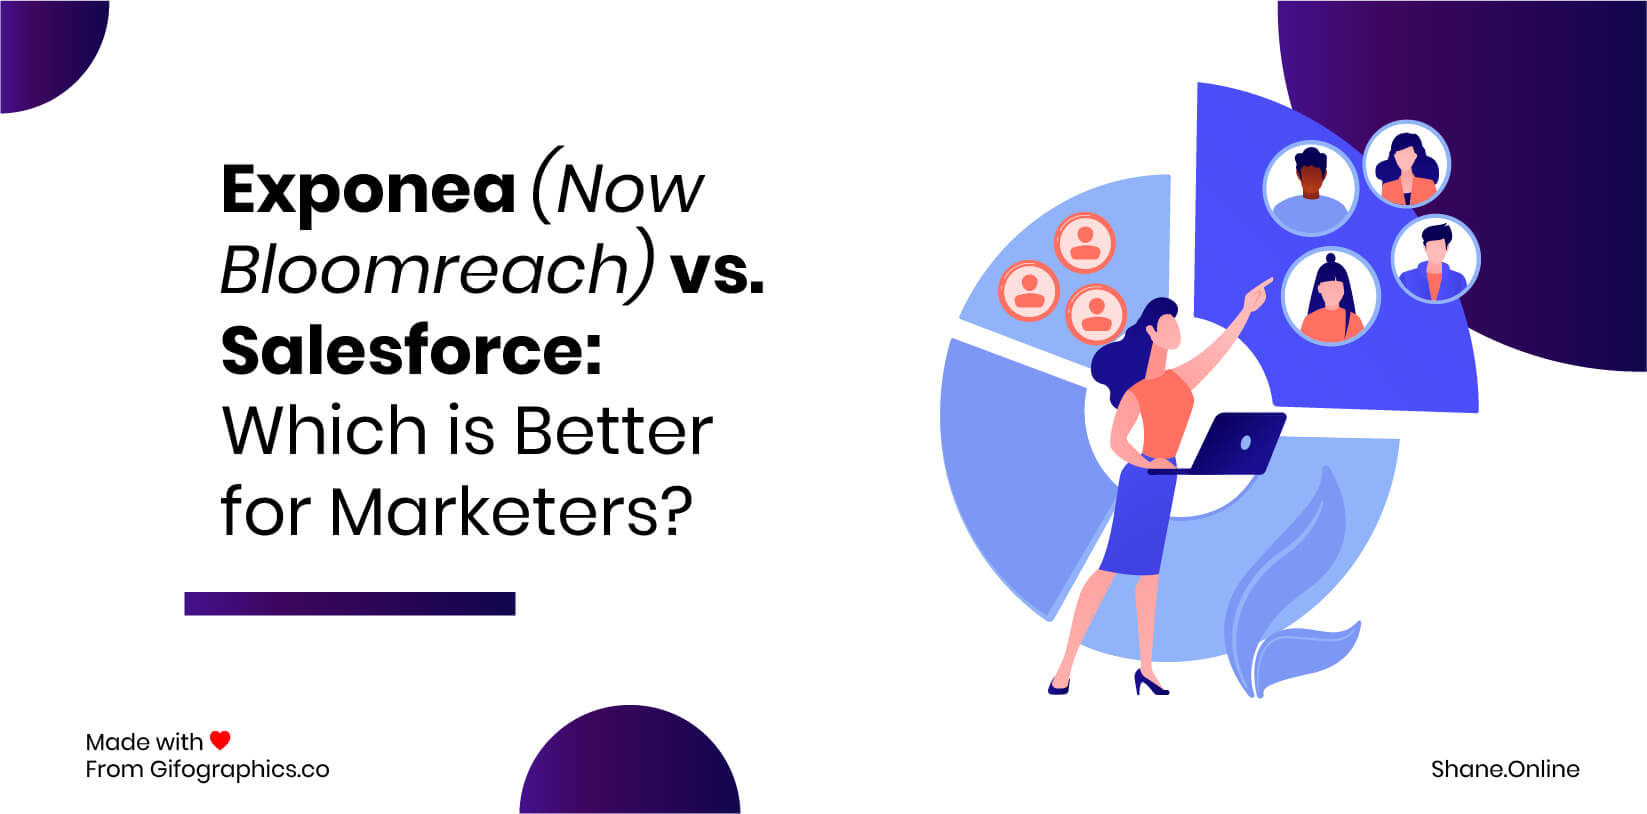 Bloomreach Formerly Exponea vs. Salesforce: Which is Better in 2022?